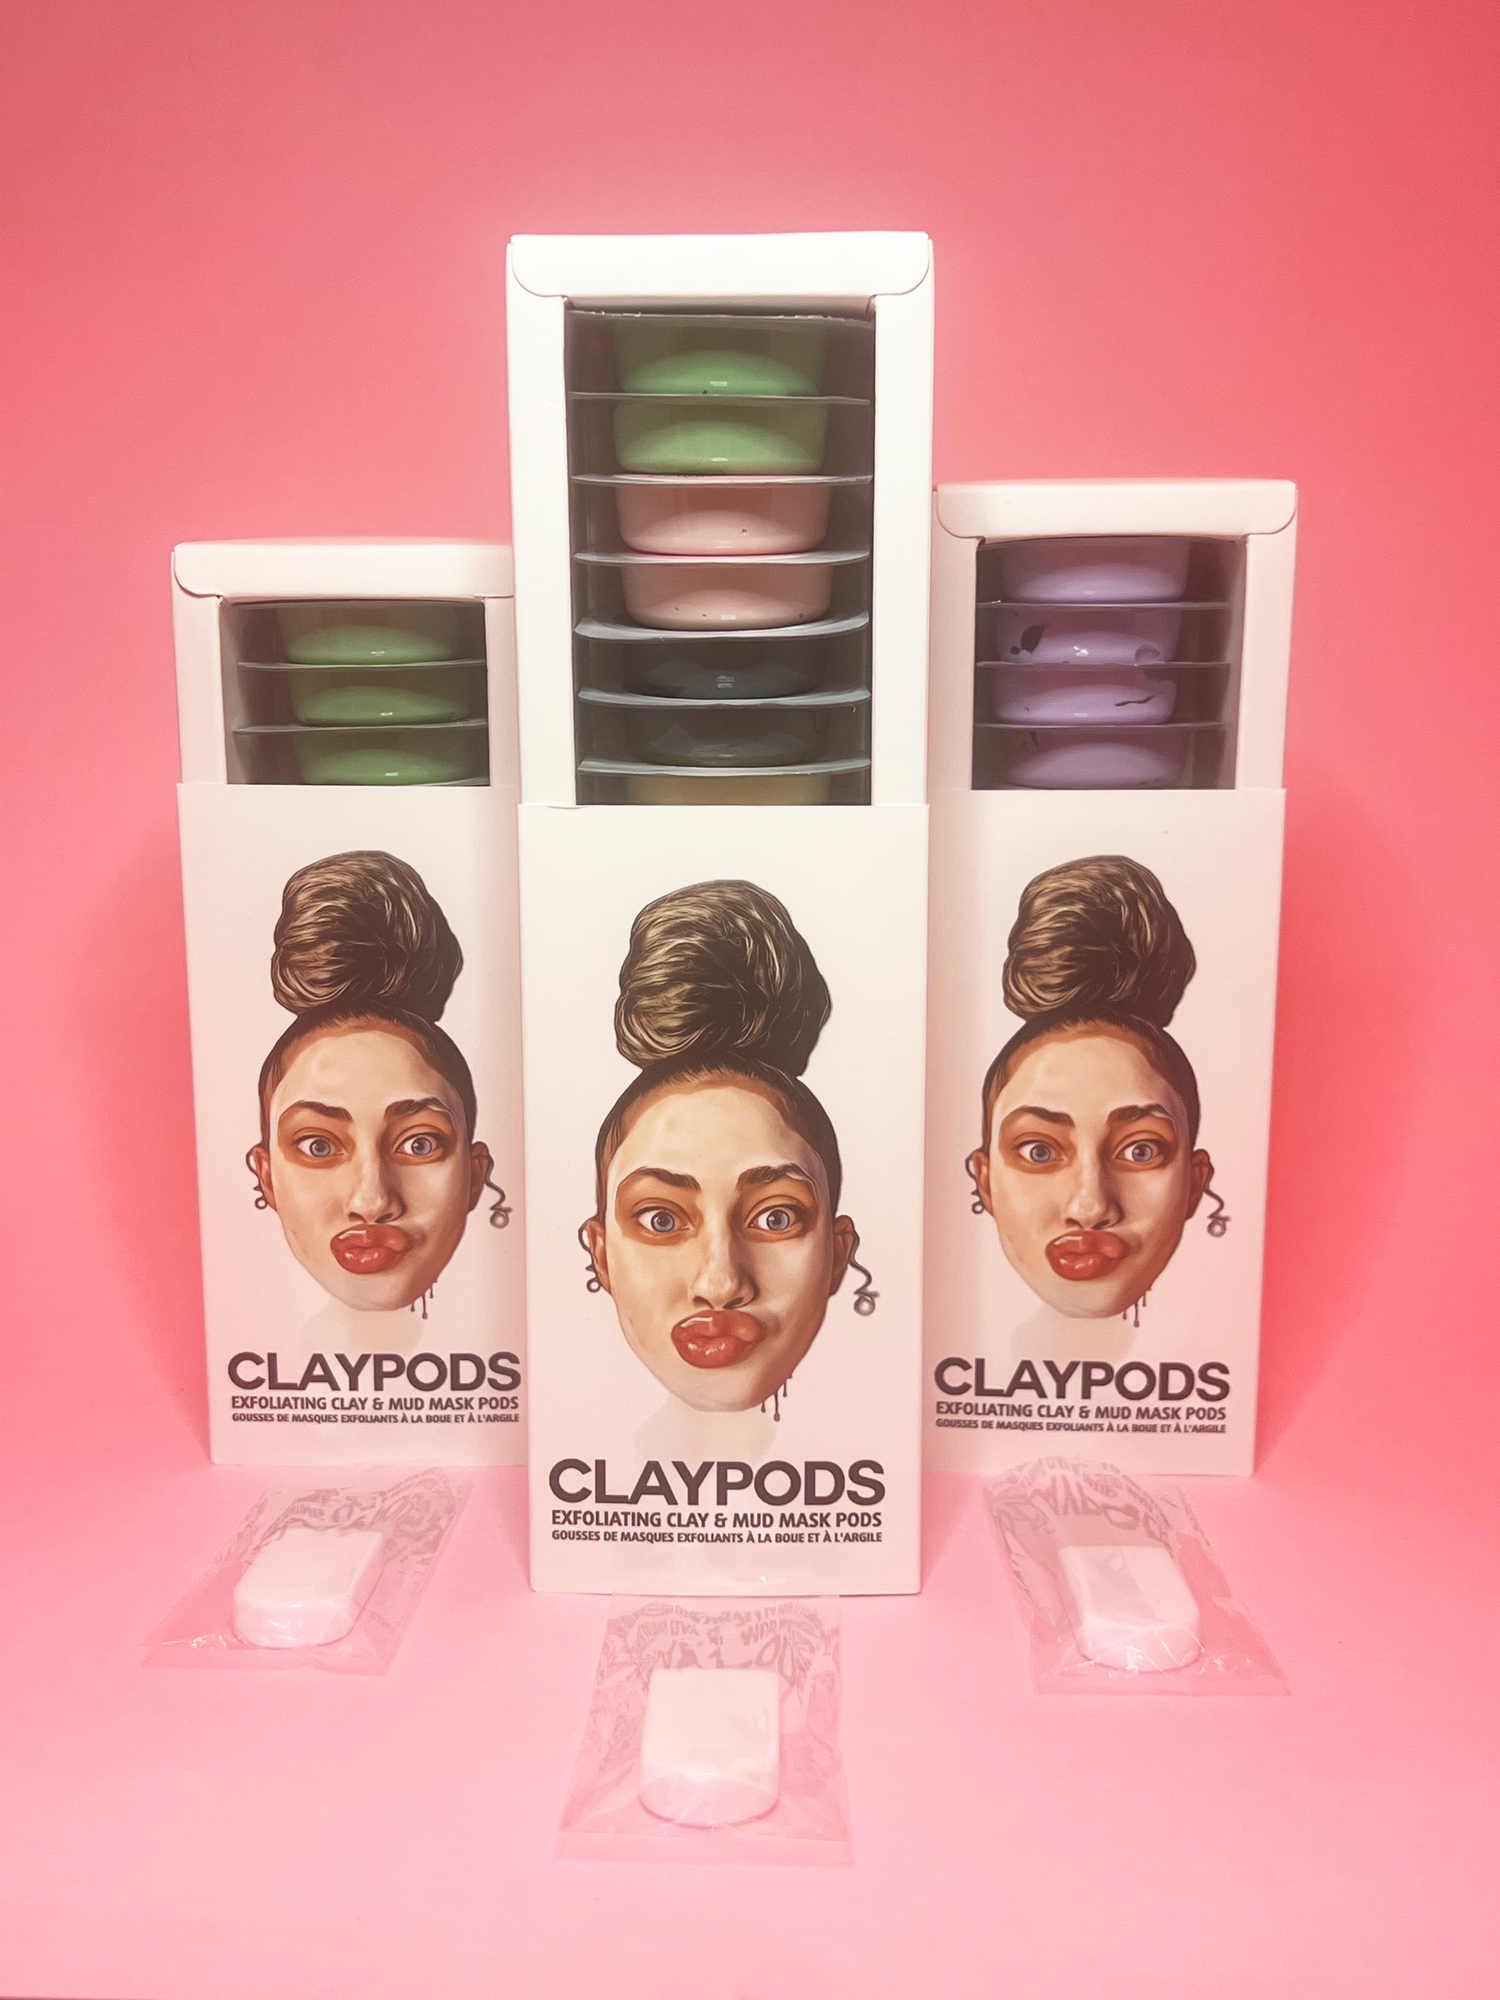 Feature image, 3 boxes of clay pods with mud mask brushes